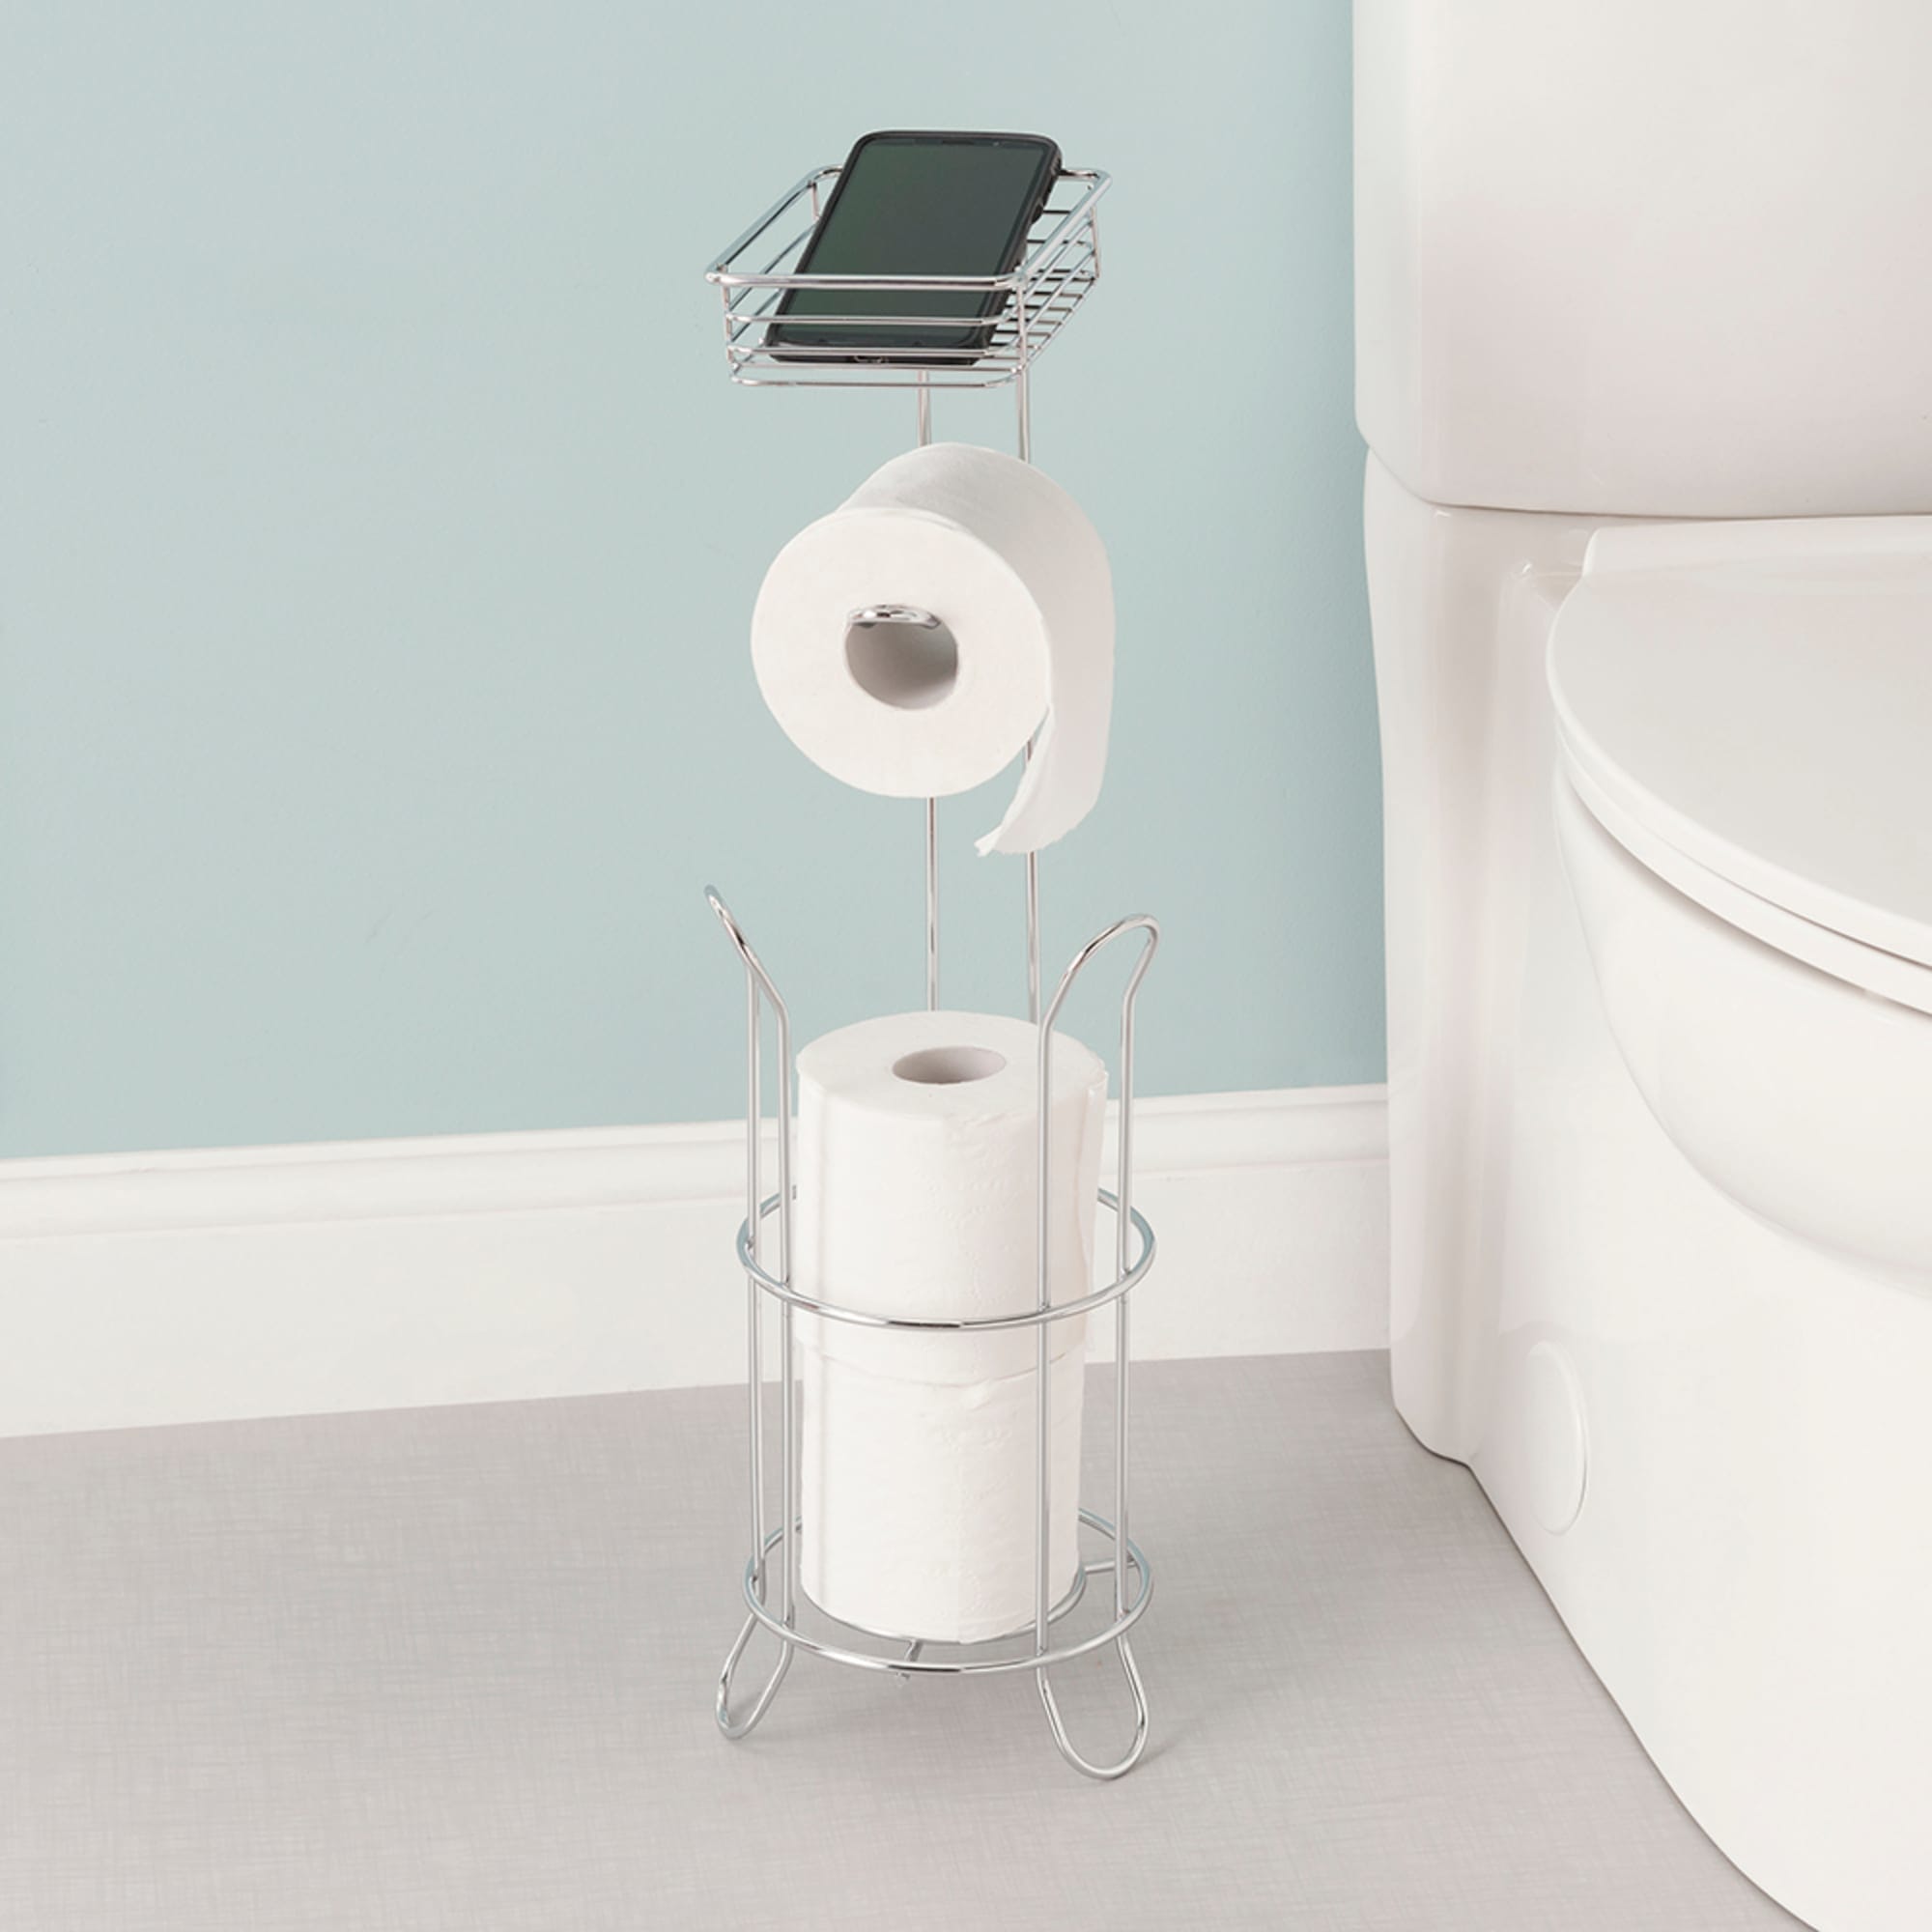 Home Basics Free Standing Dispensing Toilet Paper Holder with Built-in Accessory Tray, Silver $12.00 EACH, CASE PACK OF 6